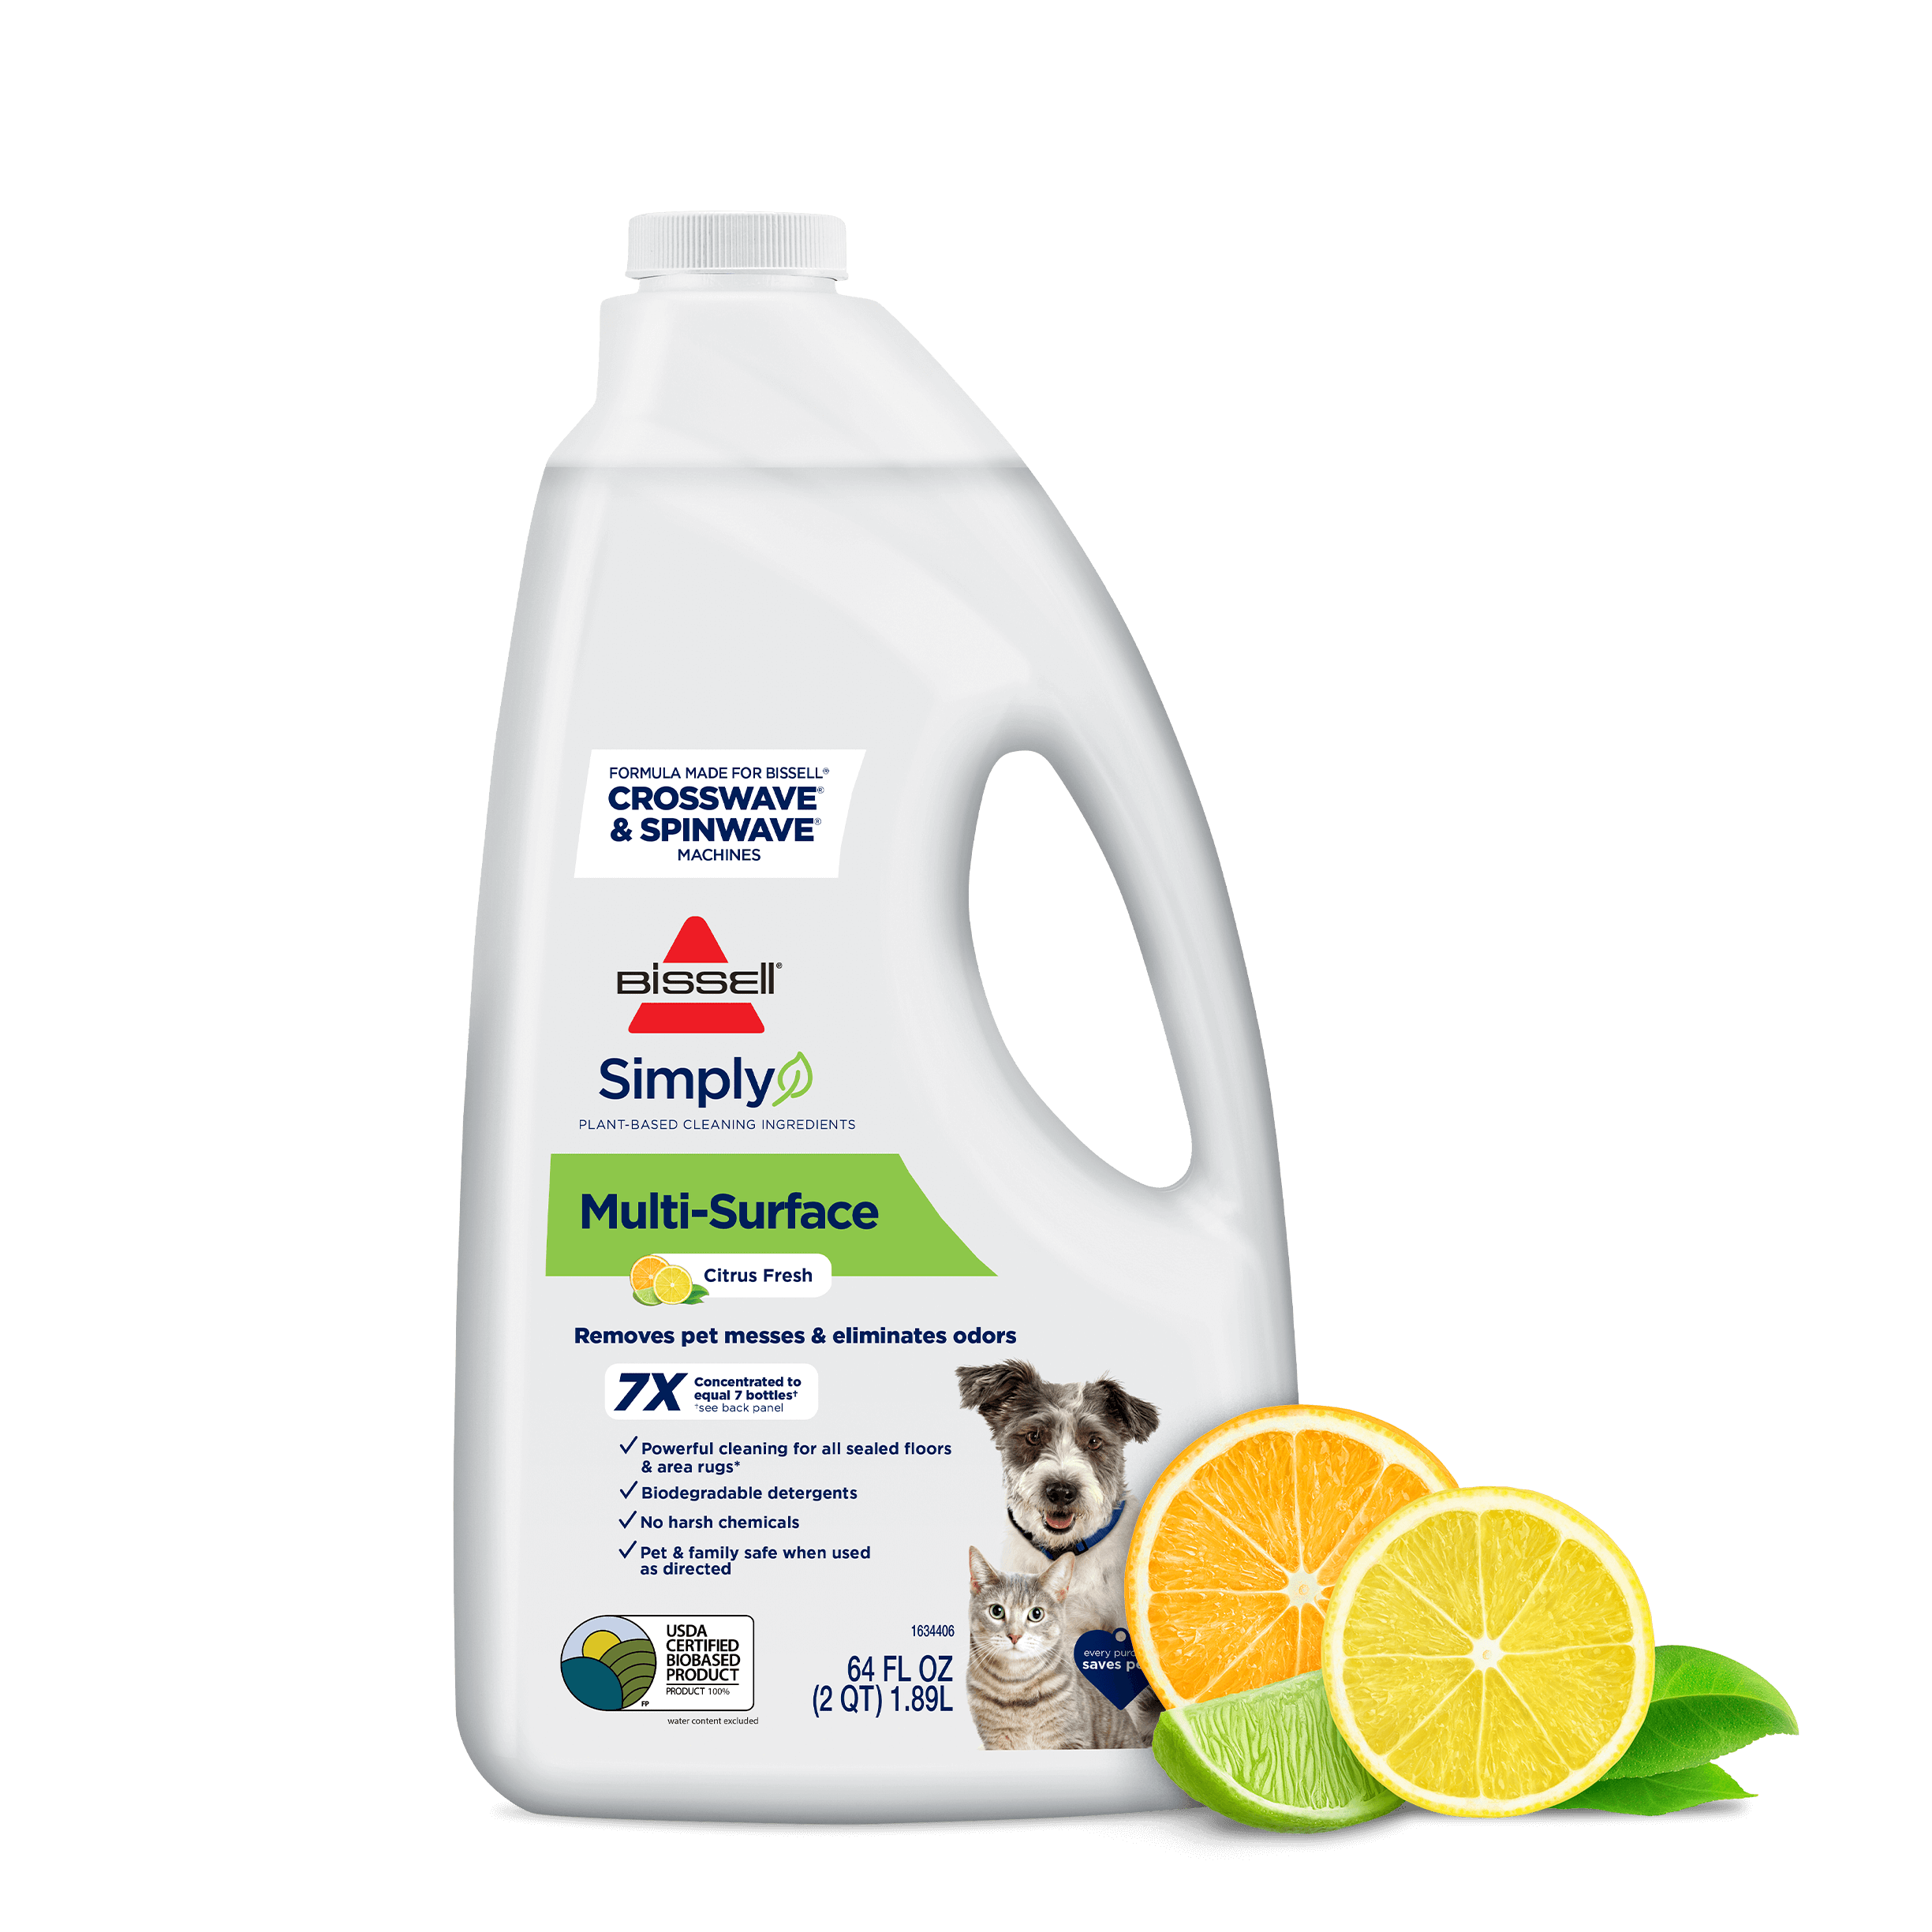 Bissell nettoyant natural multi-surface pet 2l - Conforama